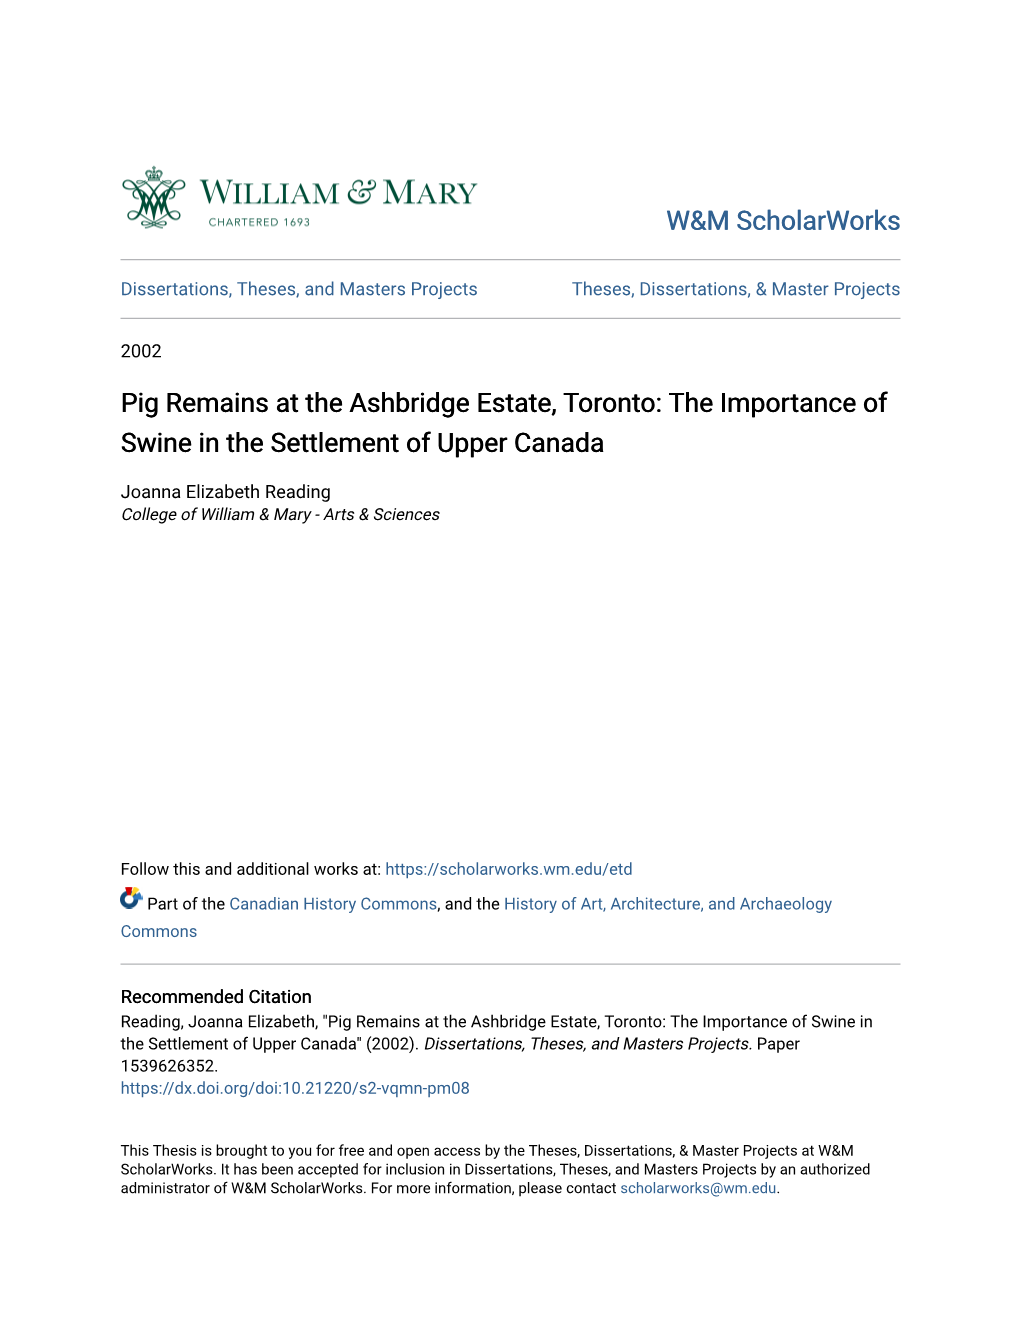 Pig Remains at the Ashbridge Estate, Toronto: the Importance of Swine in the Settlement of Upper Canada